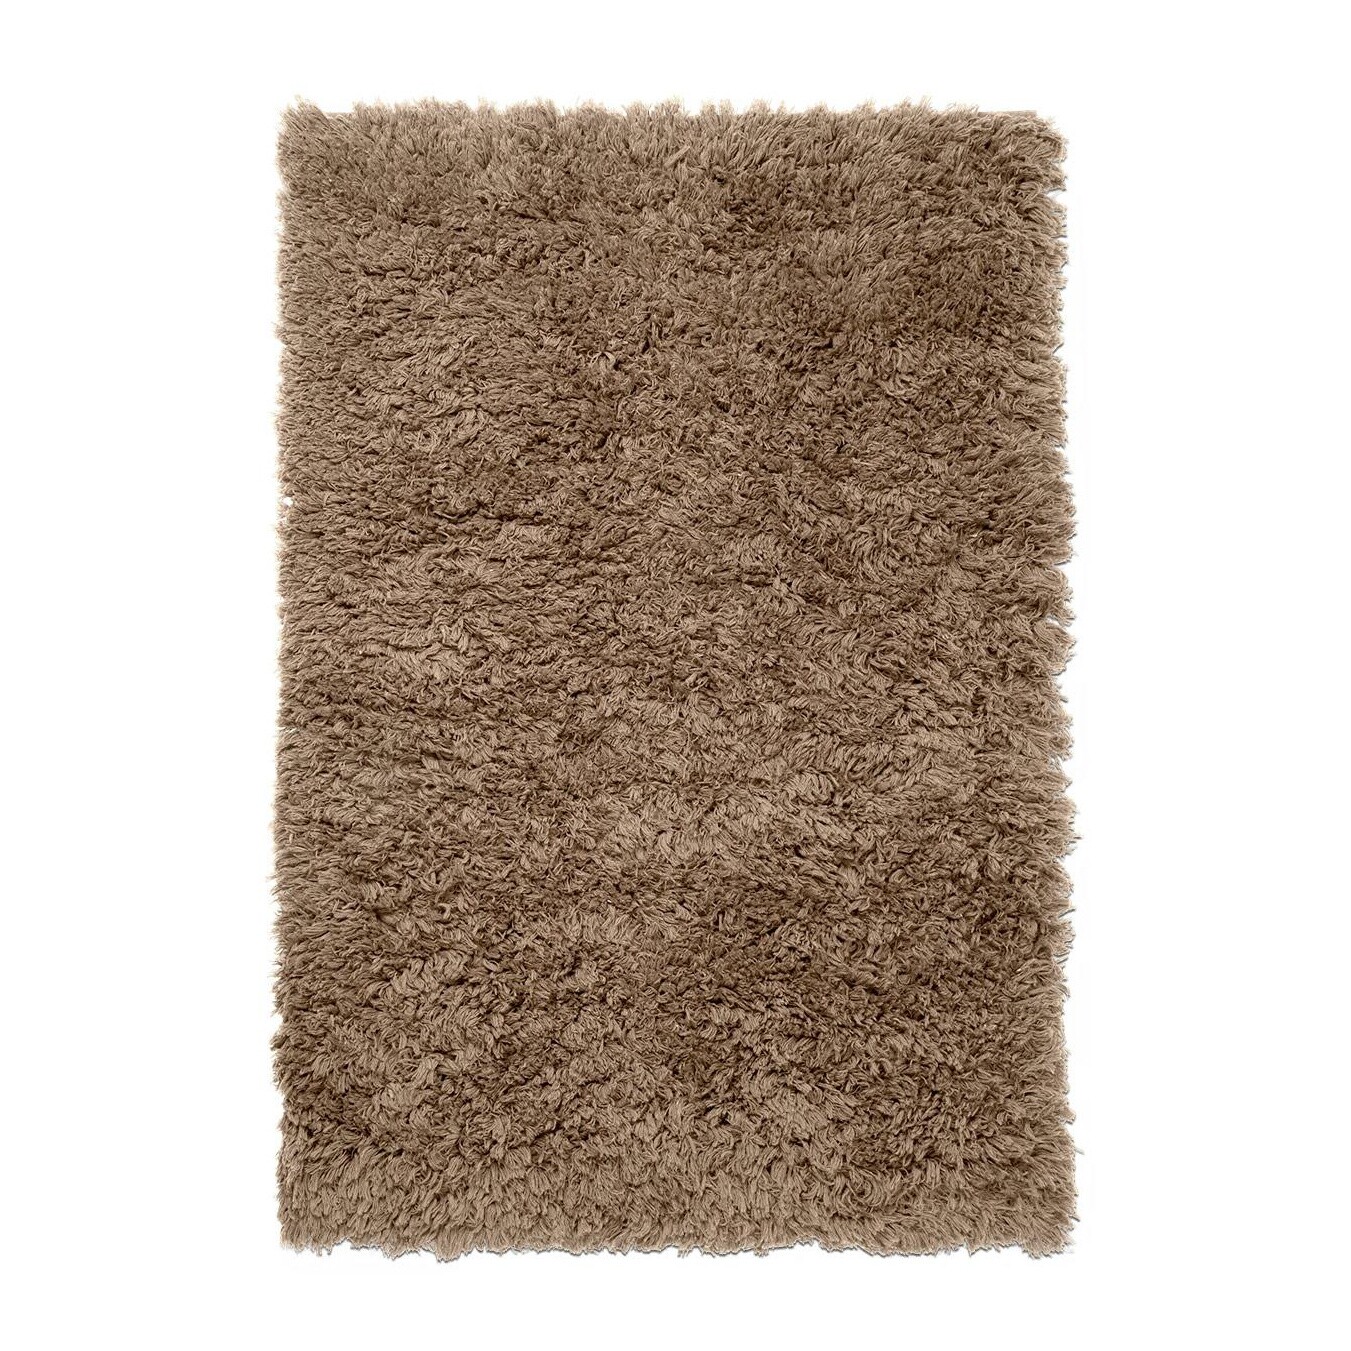 Ferm Living Meadow High Pile Rug, What Is A High Pile Rug